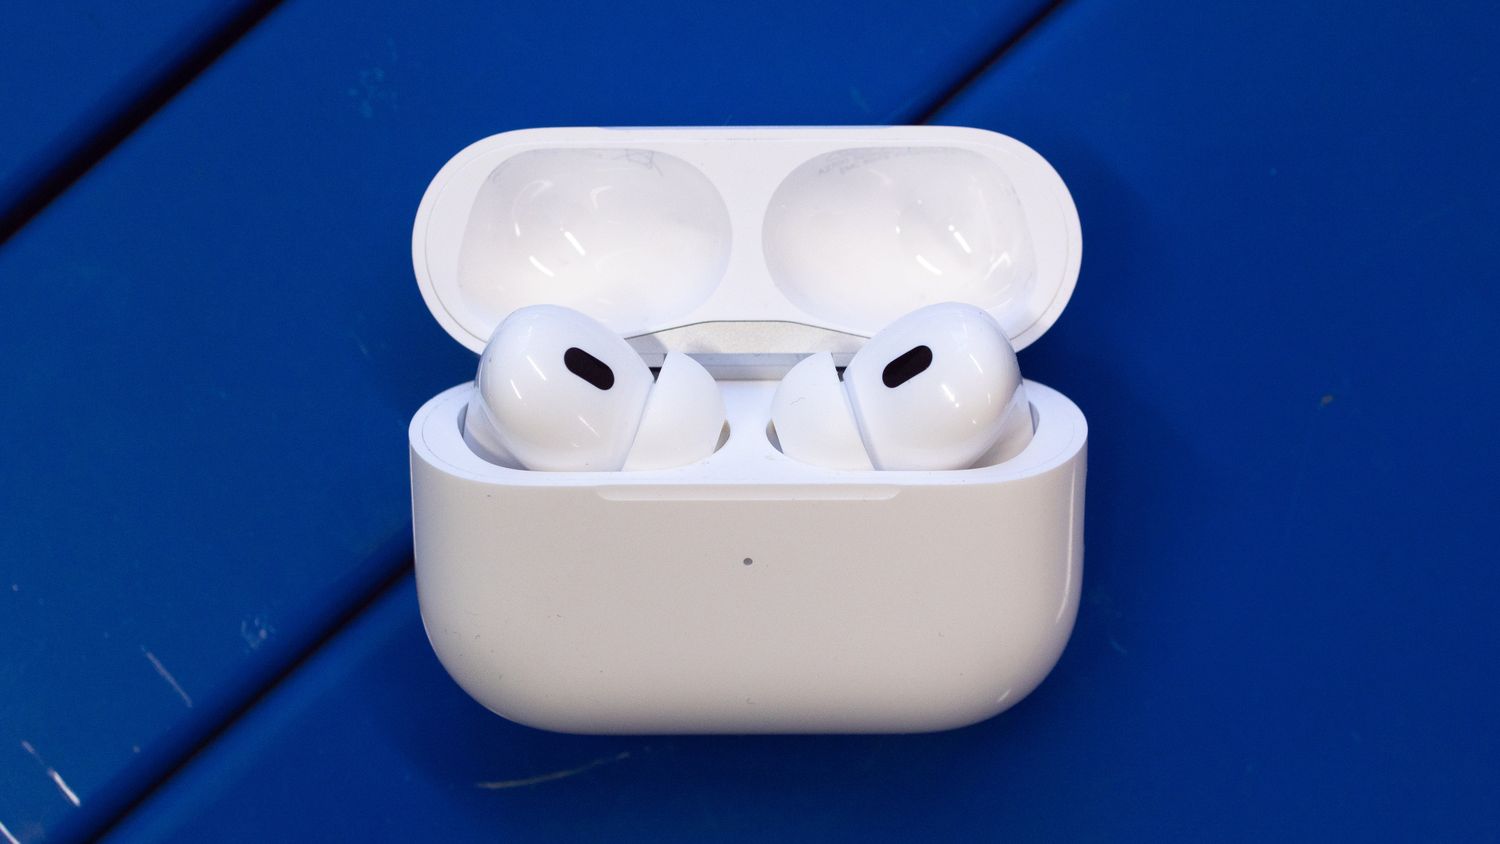 apple-airpods-are-out-of-stock-almost-everywhere